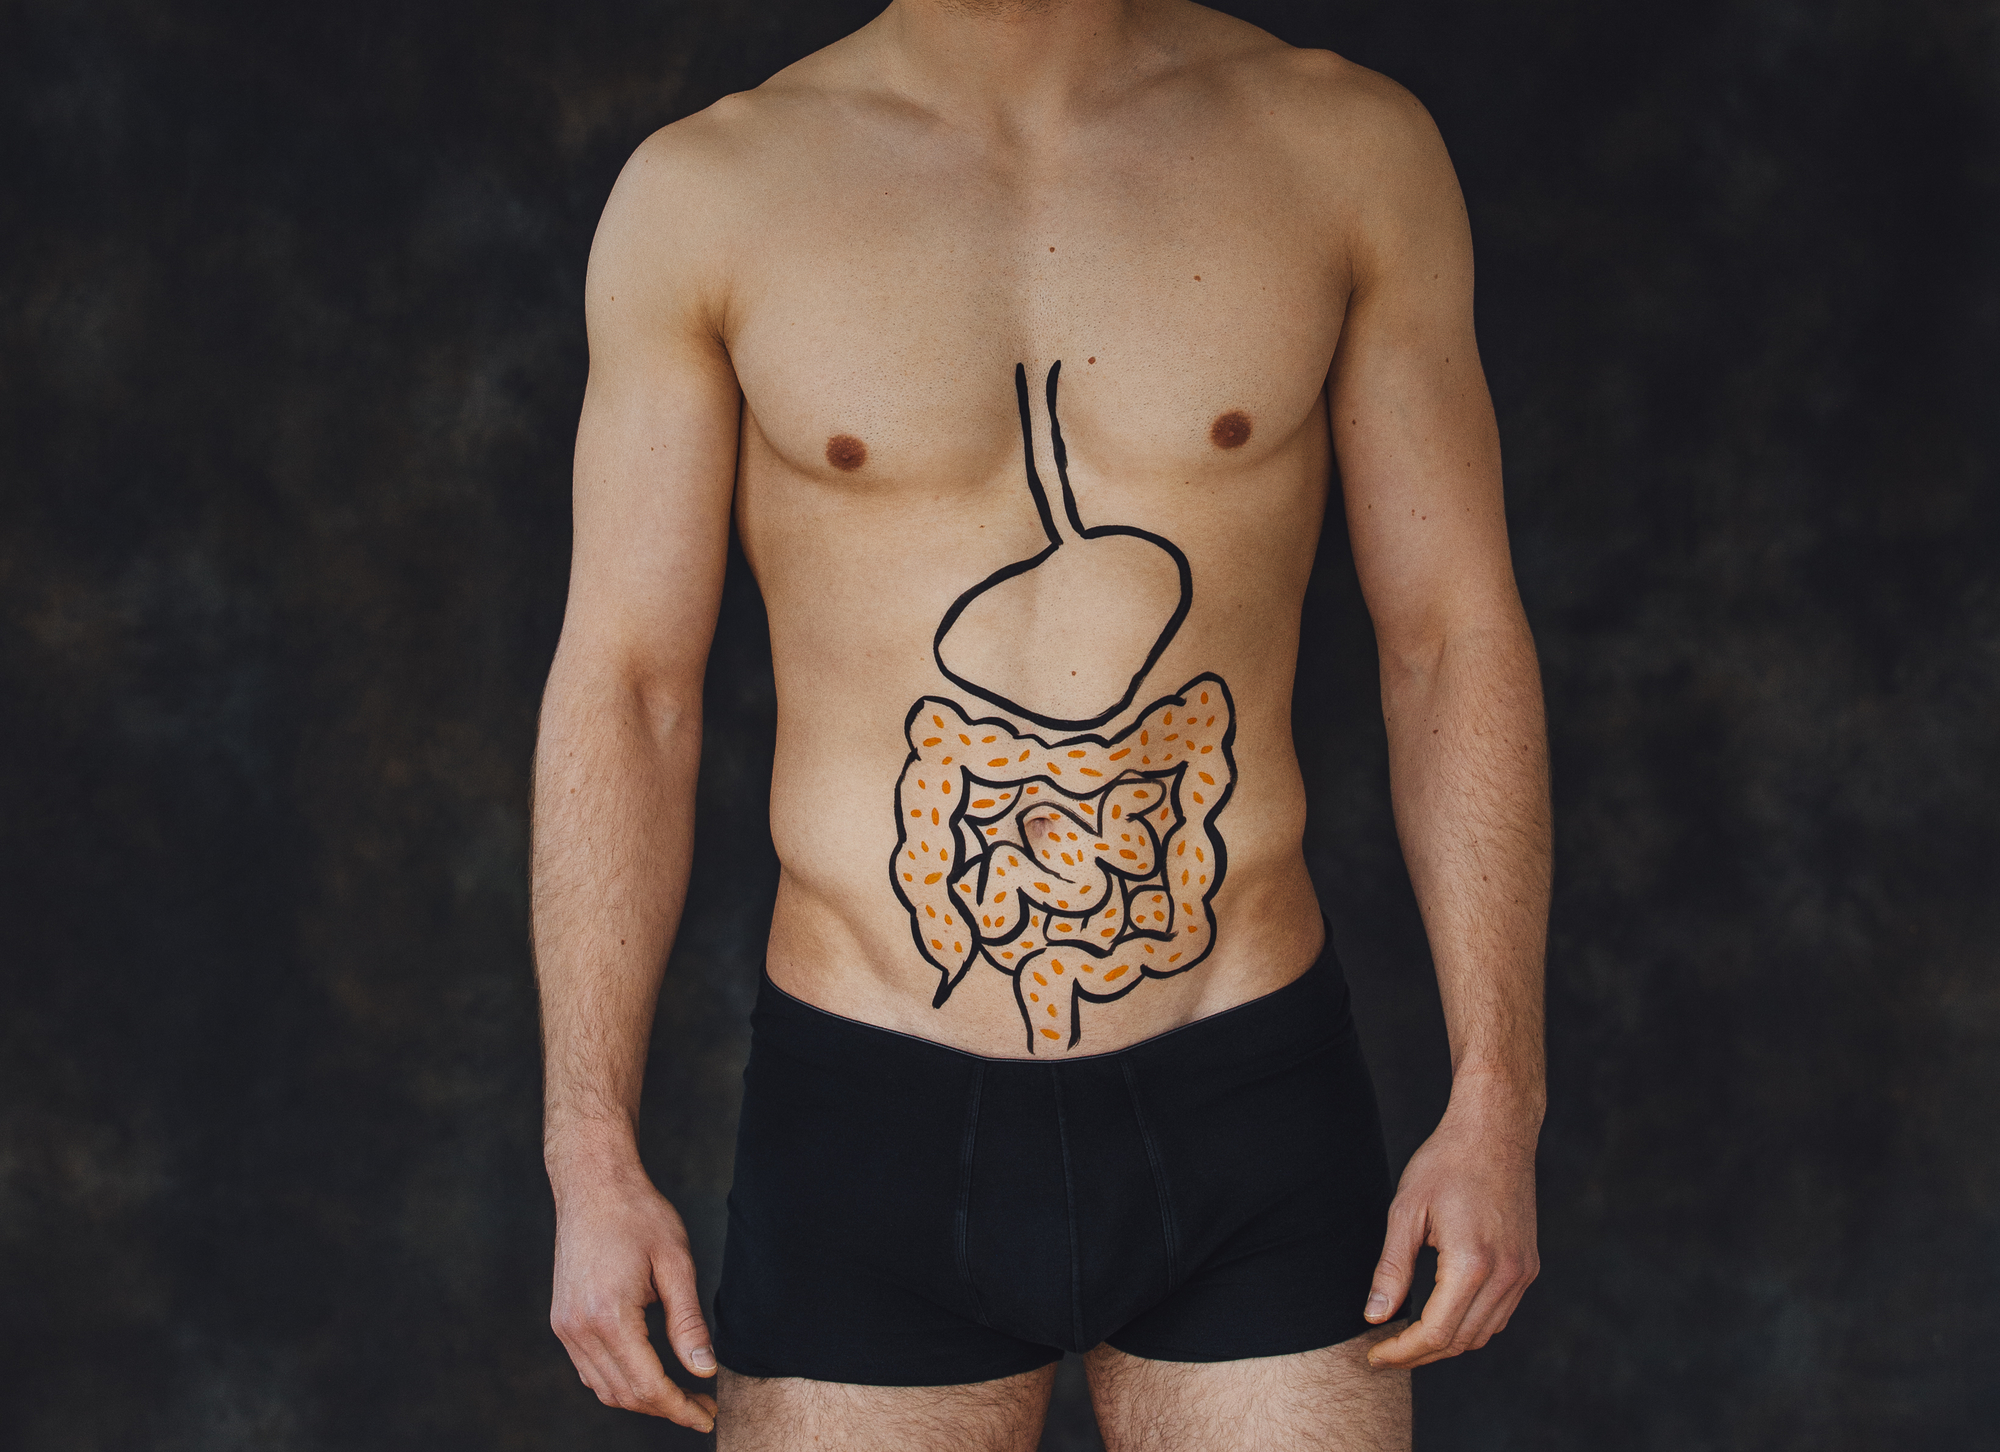 Digestive tract - by Doug Cook RD